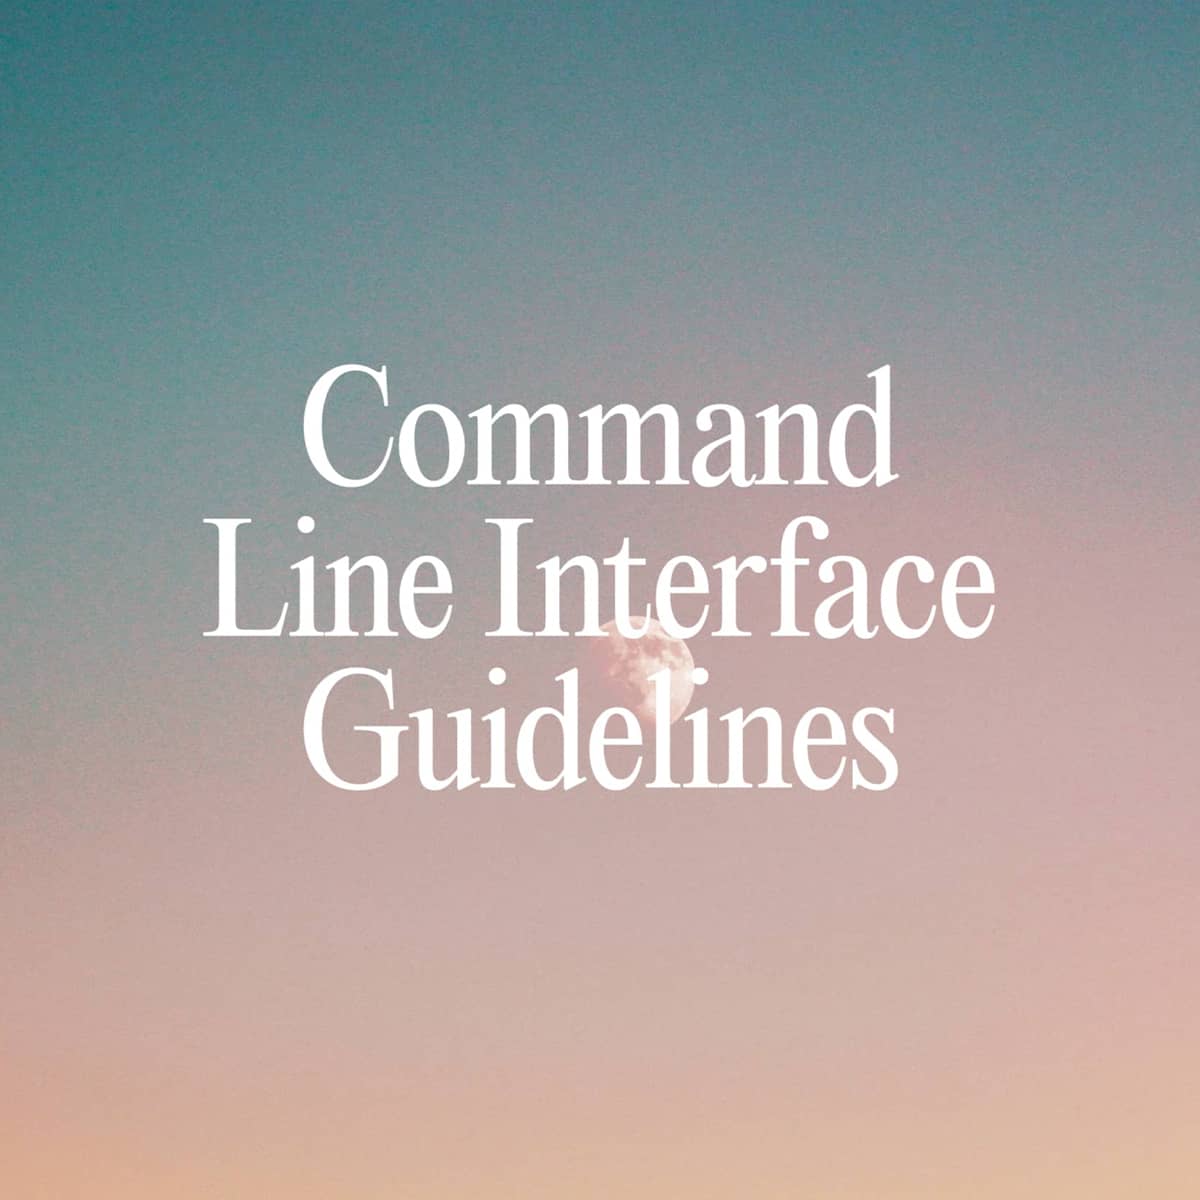 Command Line Interface Guidelines wordmark. Brand and design